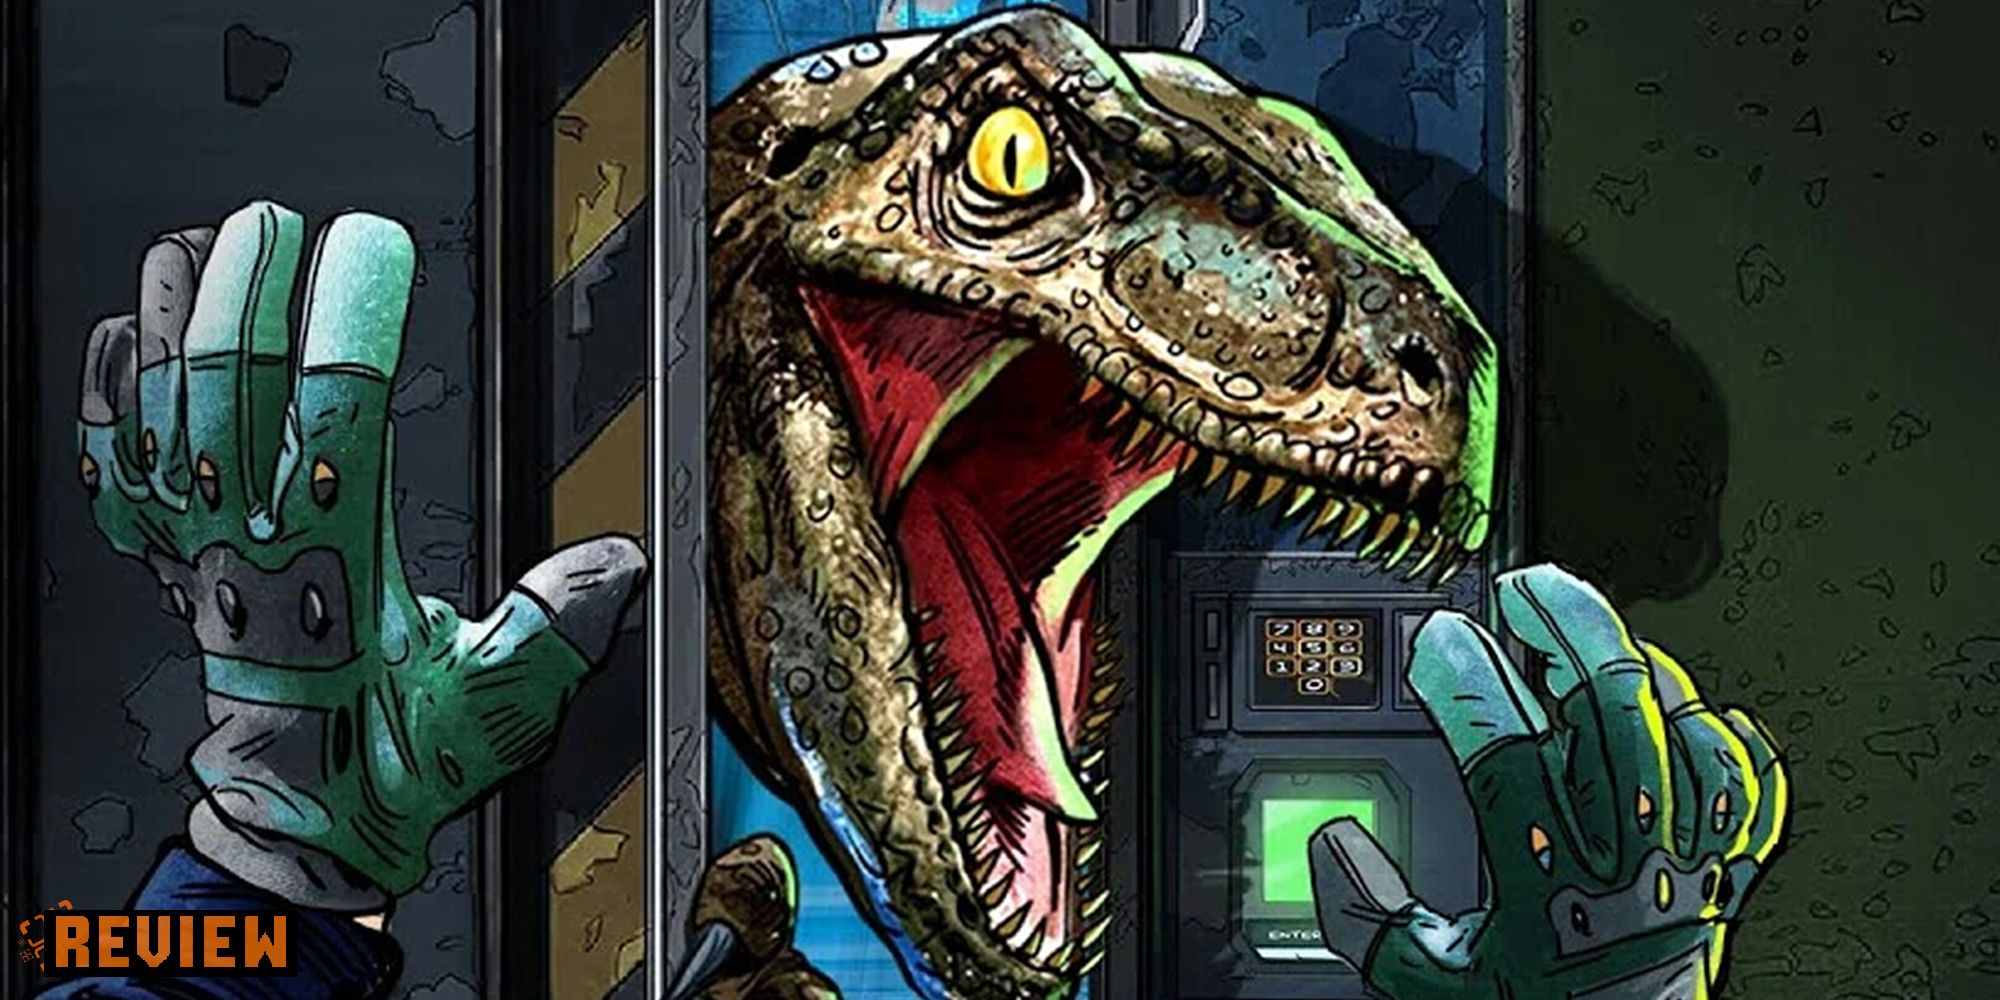 Game art from Jurassic World Aftermath.